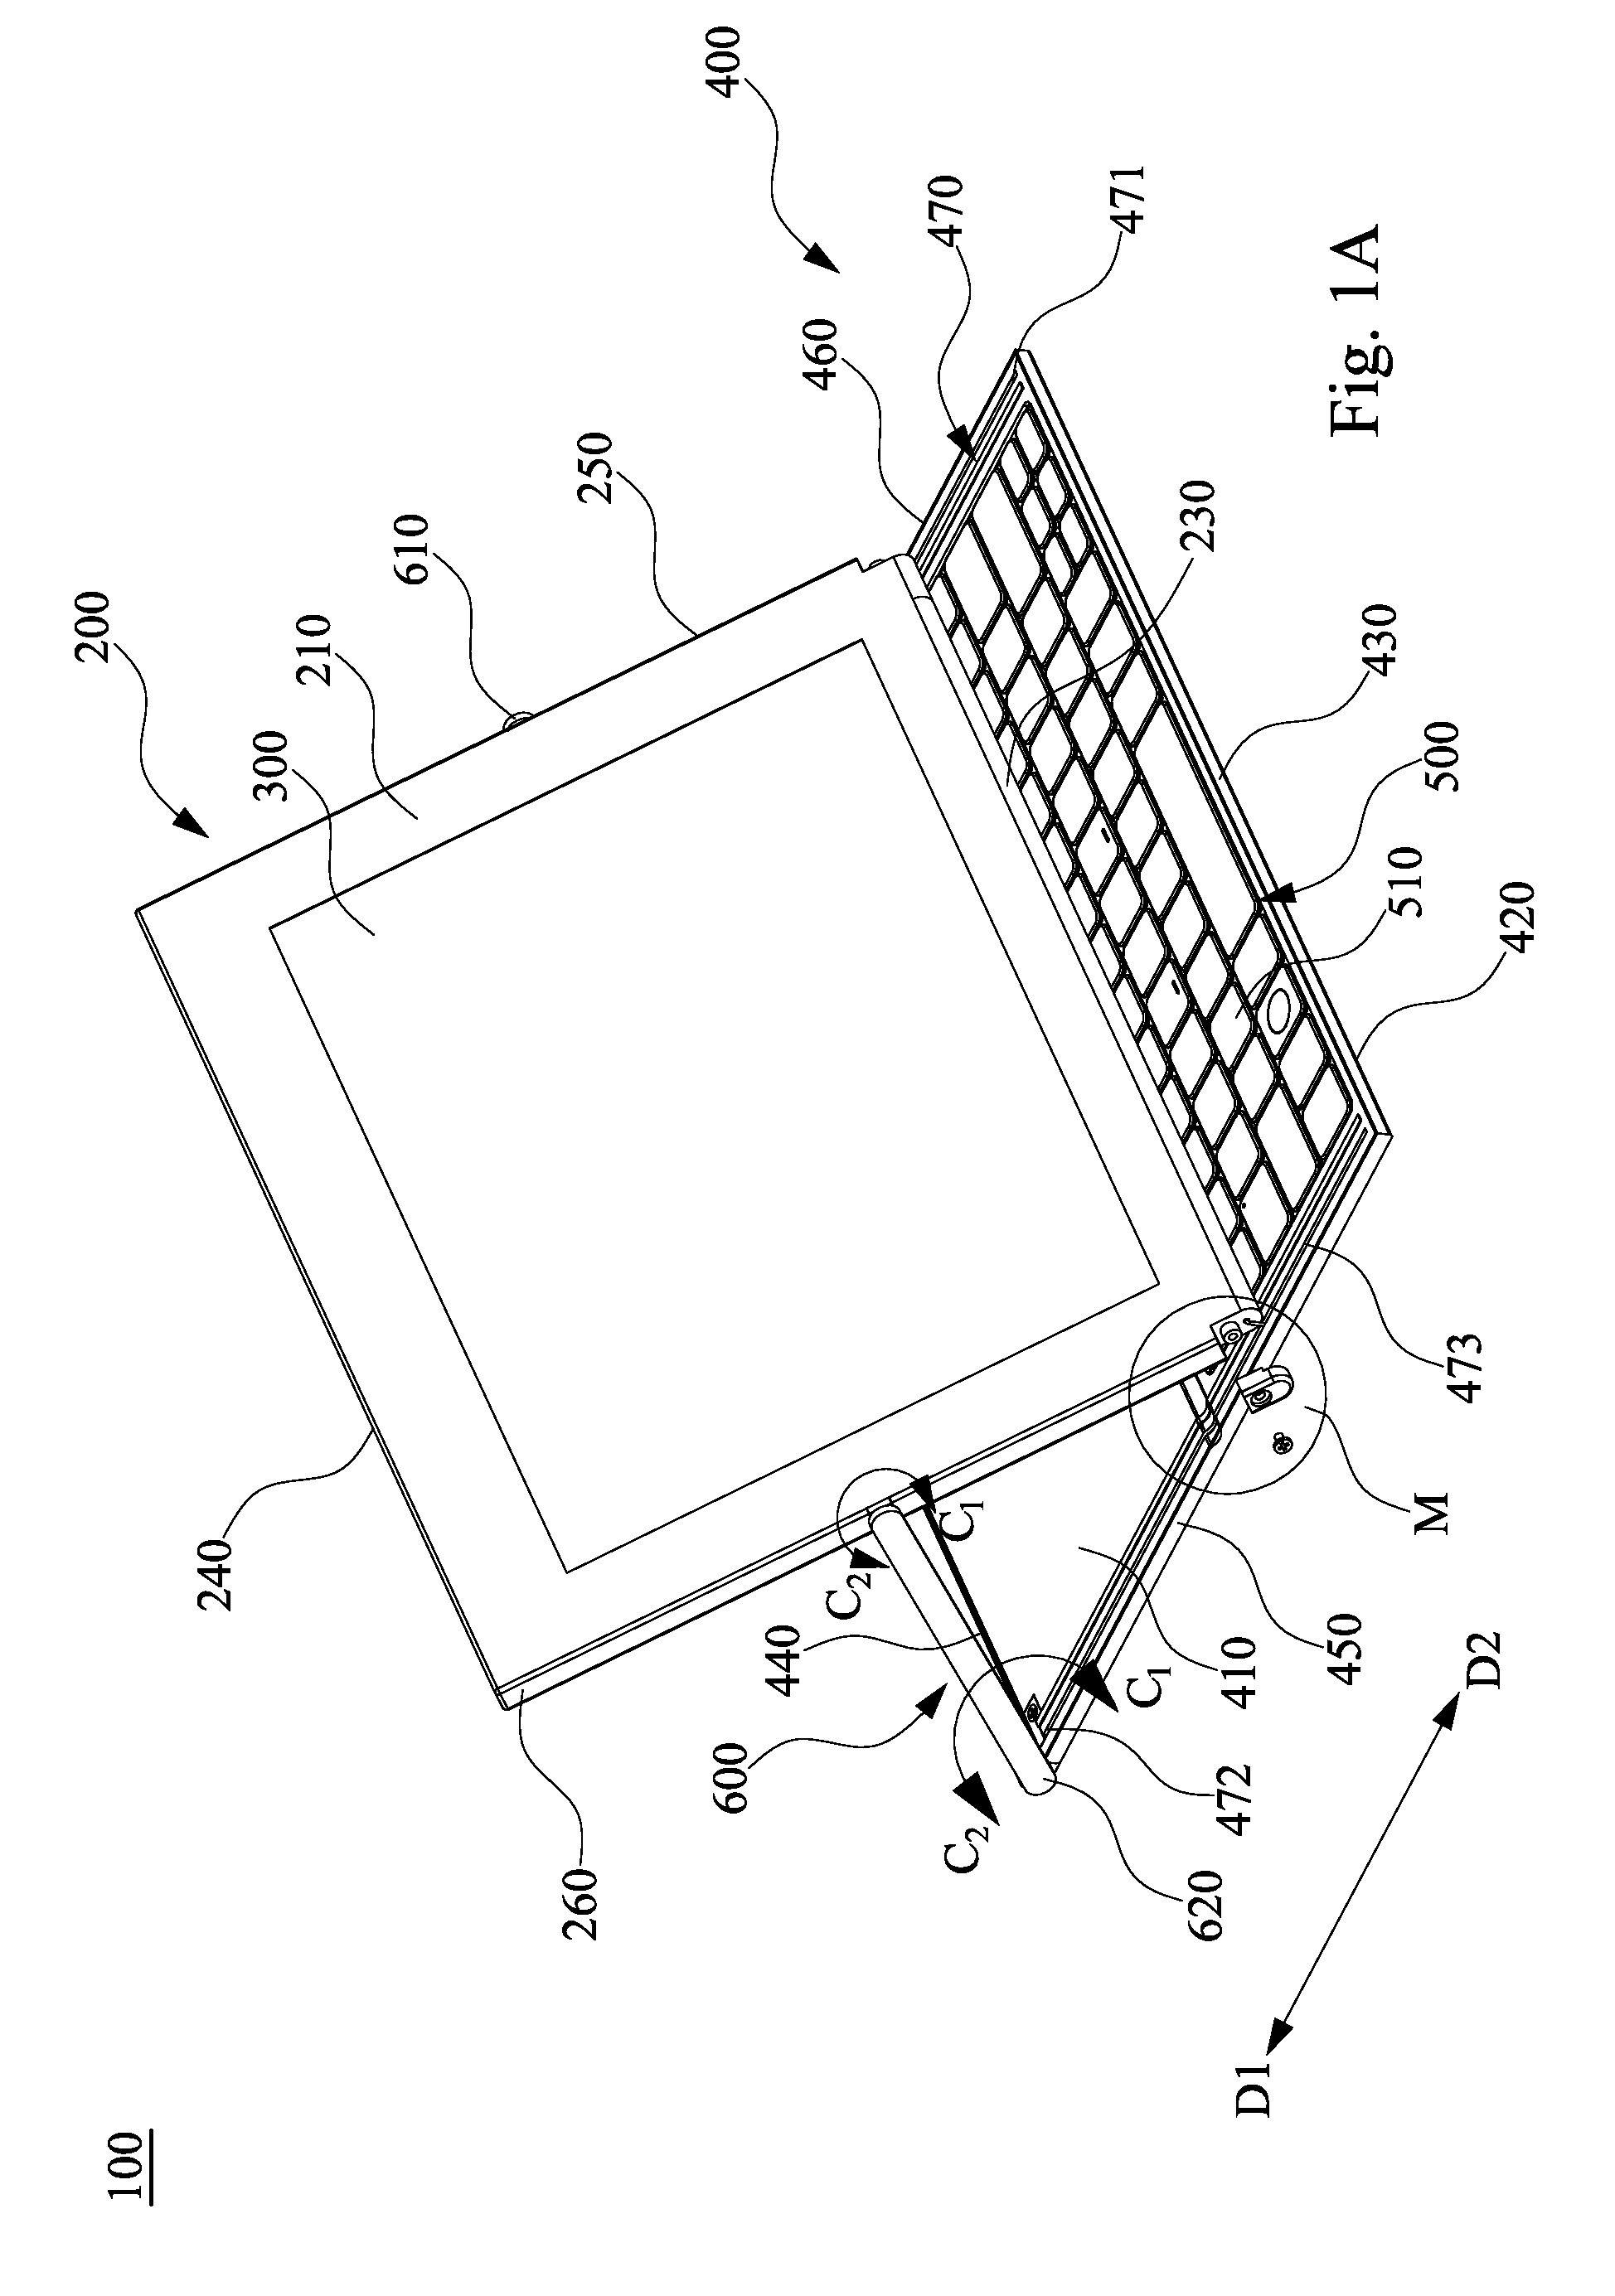 Portable electrical device